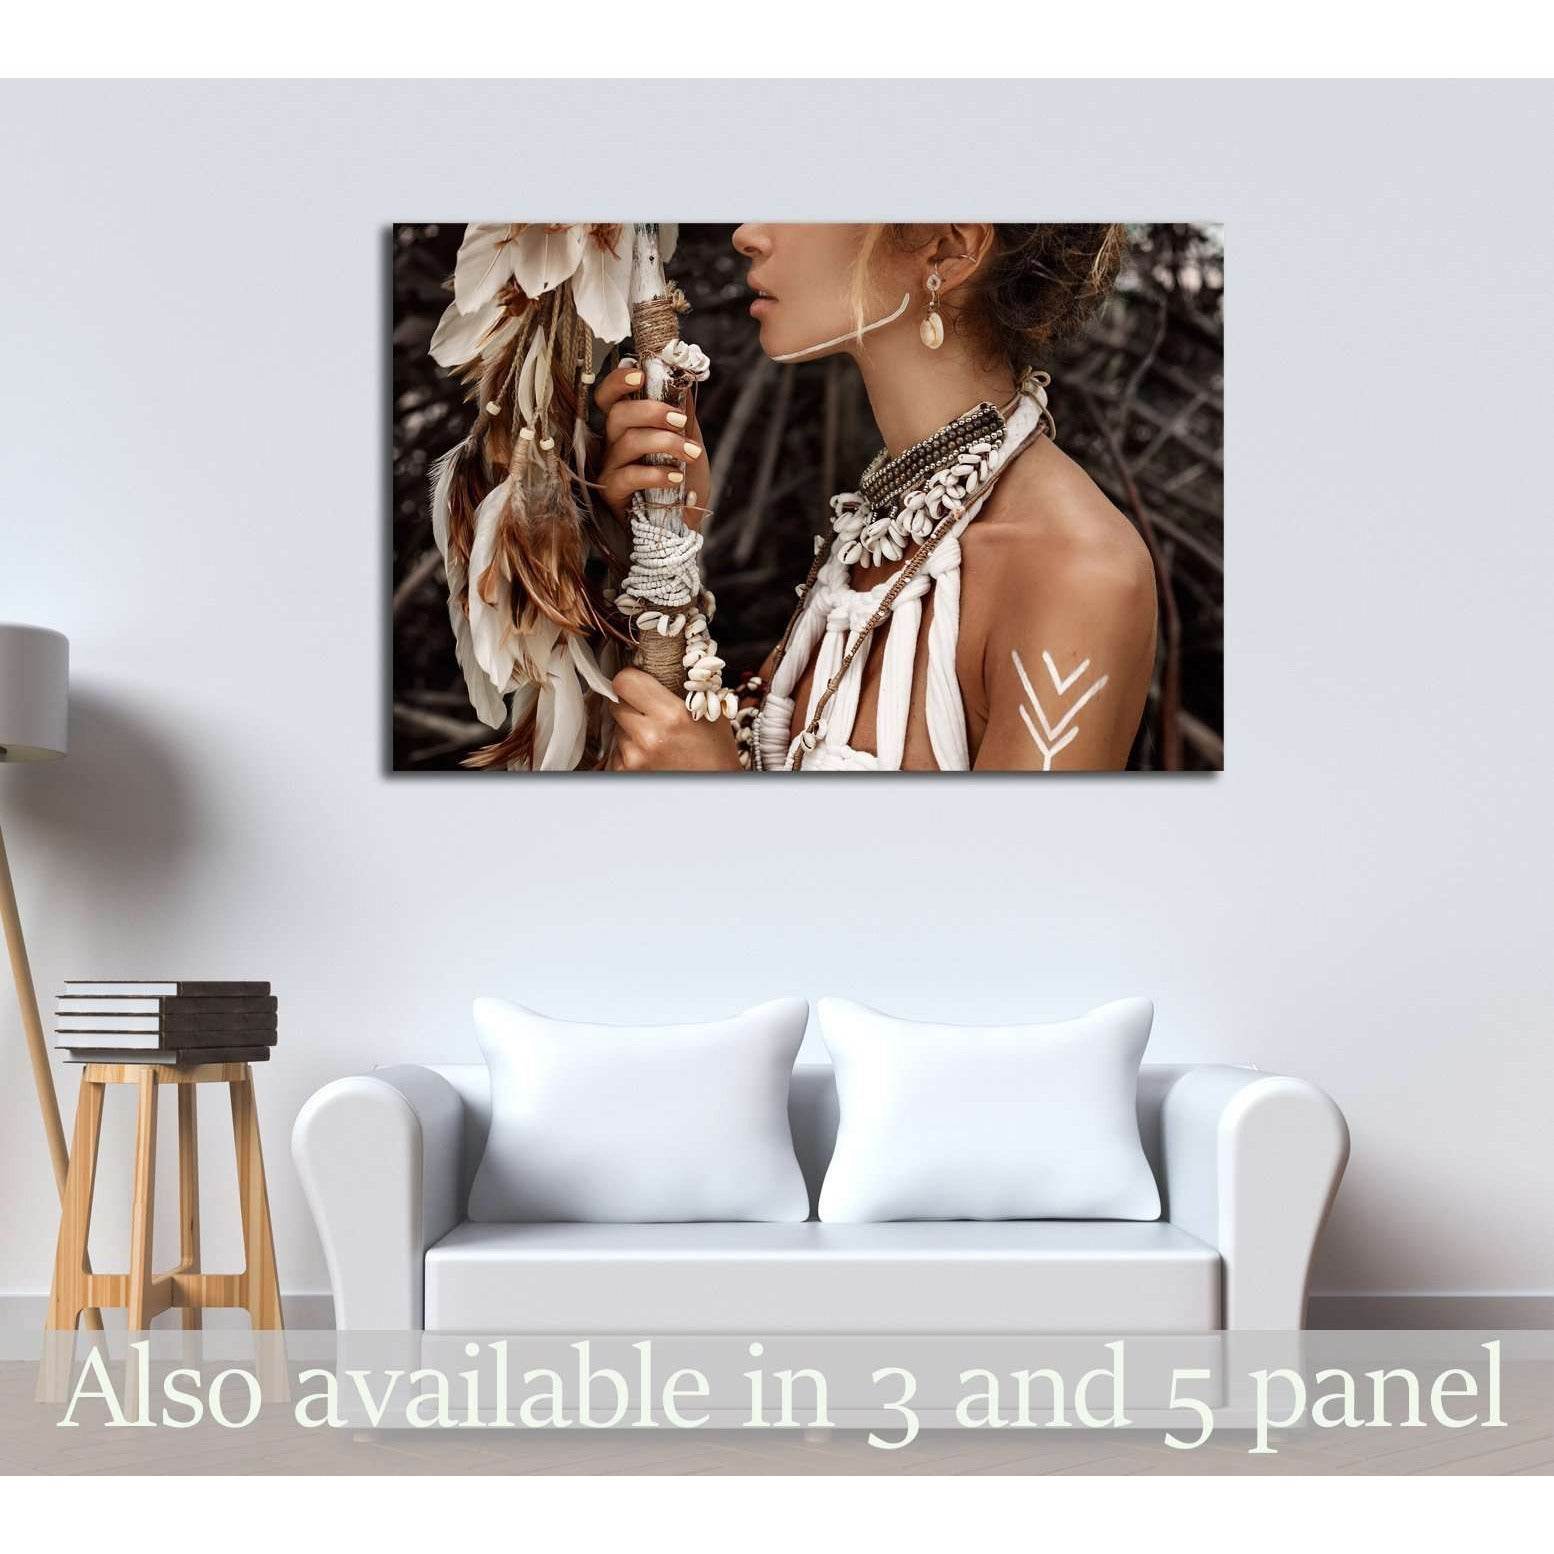 Attractive wild boho woman close up portrait №2767 Ready to Hang Canvas Print